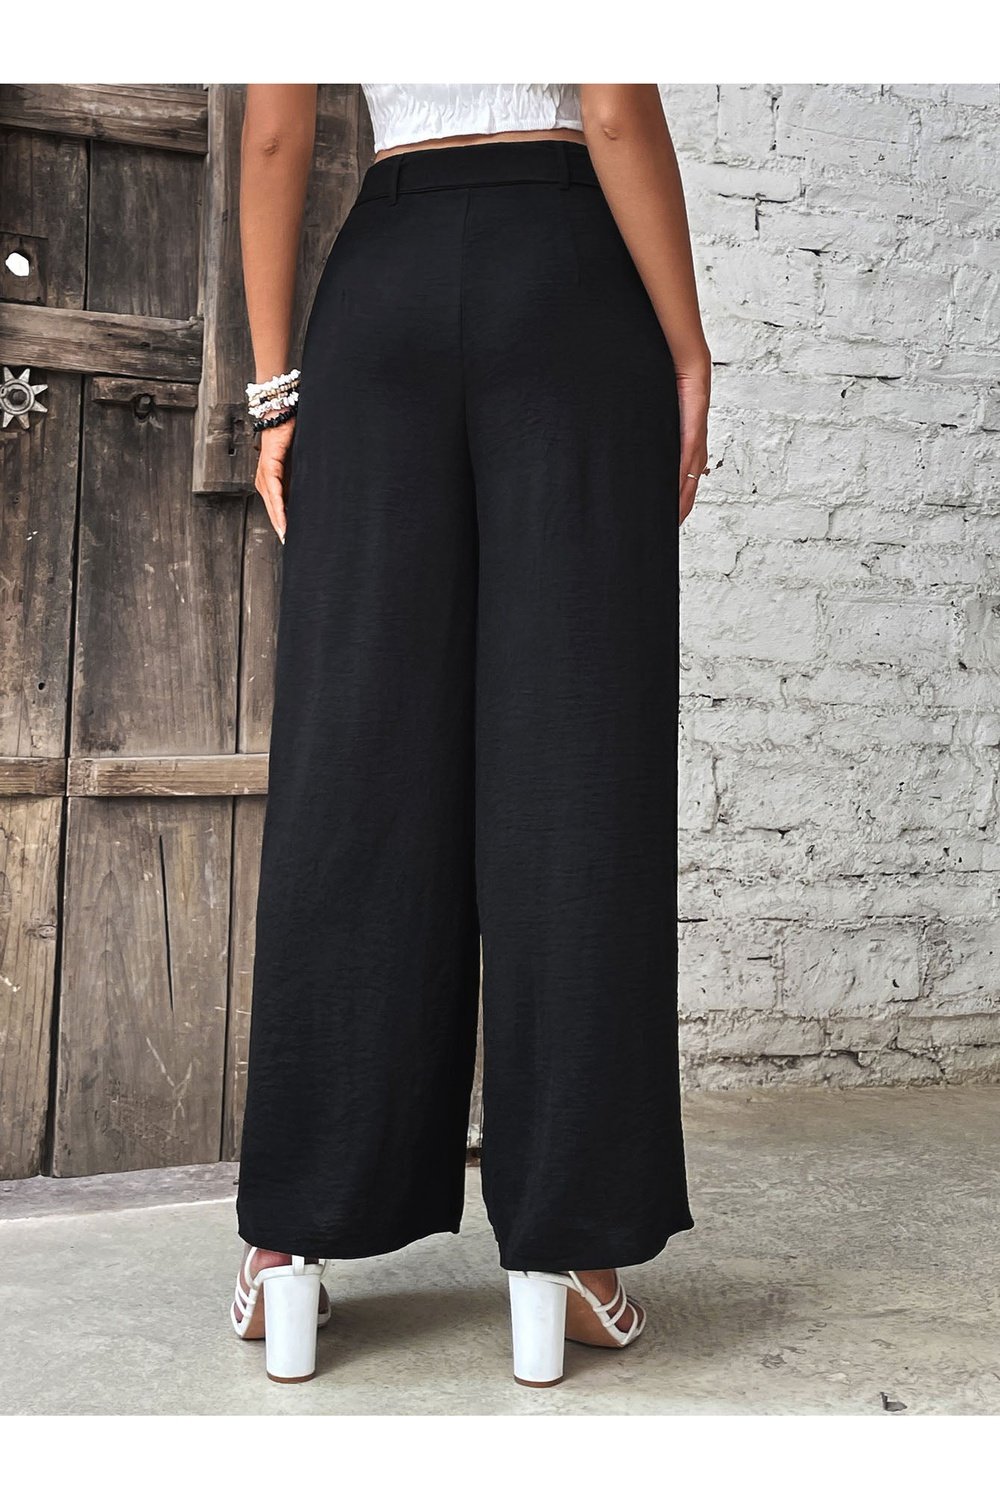 Ruched High Waist Wide Leg Pants - Pants - FITGGINS